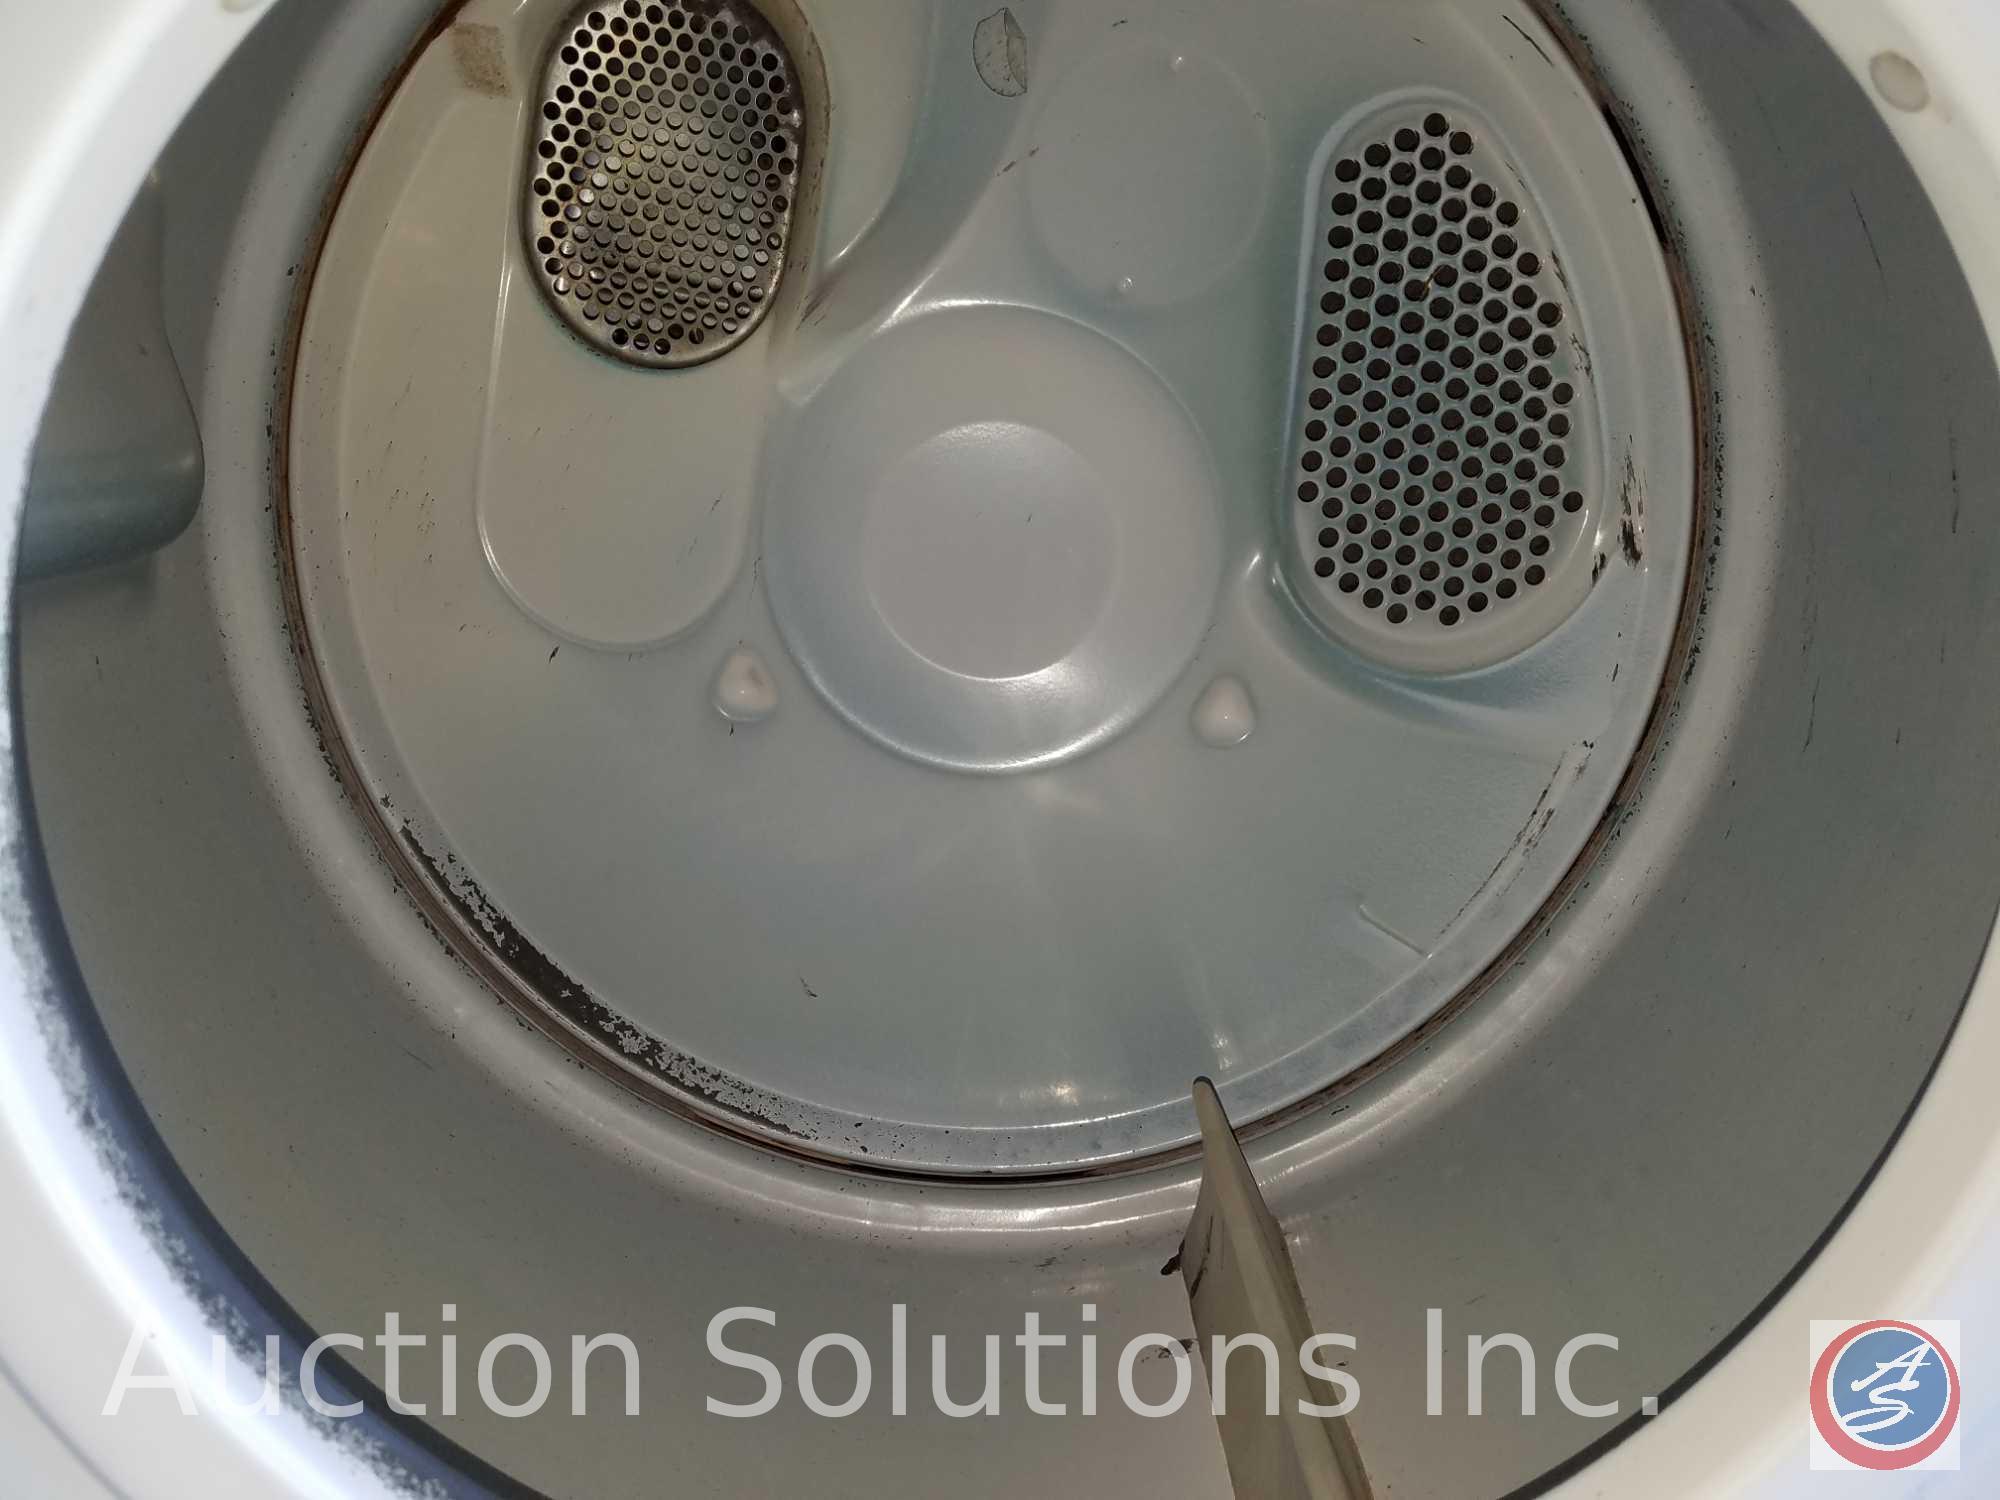 Electric Whirlpool Heavy Duty Large Capacity 5 cycle 3 temp dryer Mod No. LEV5634AW0